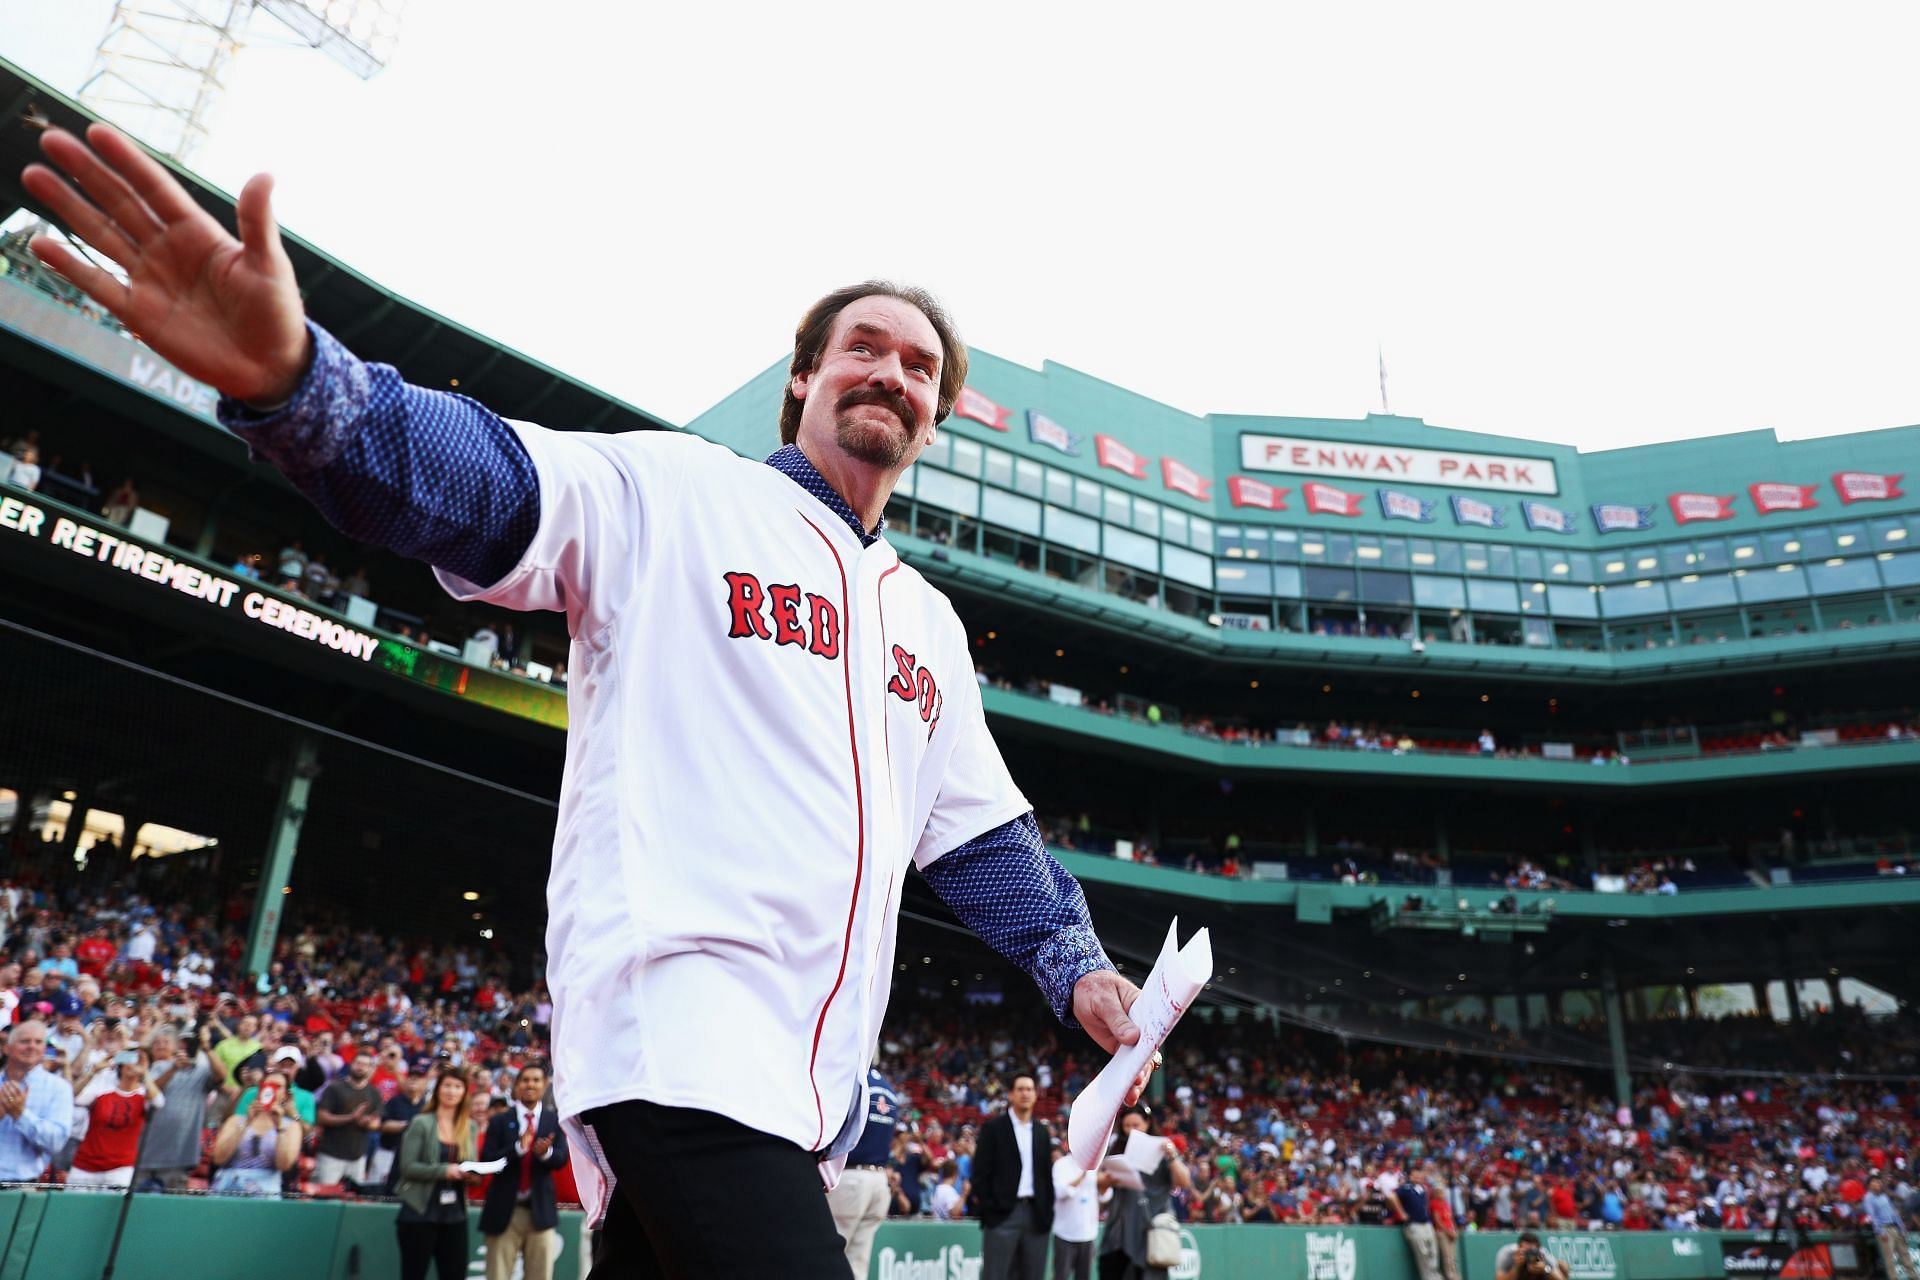 When Wade Boggs grew bitter with Boston Red Sox for not retiring his jersey